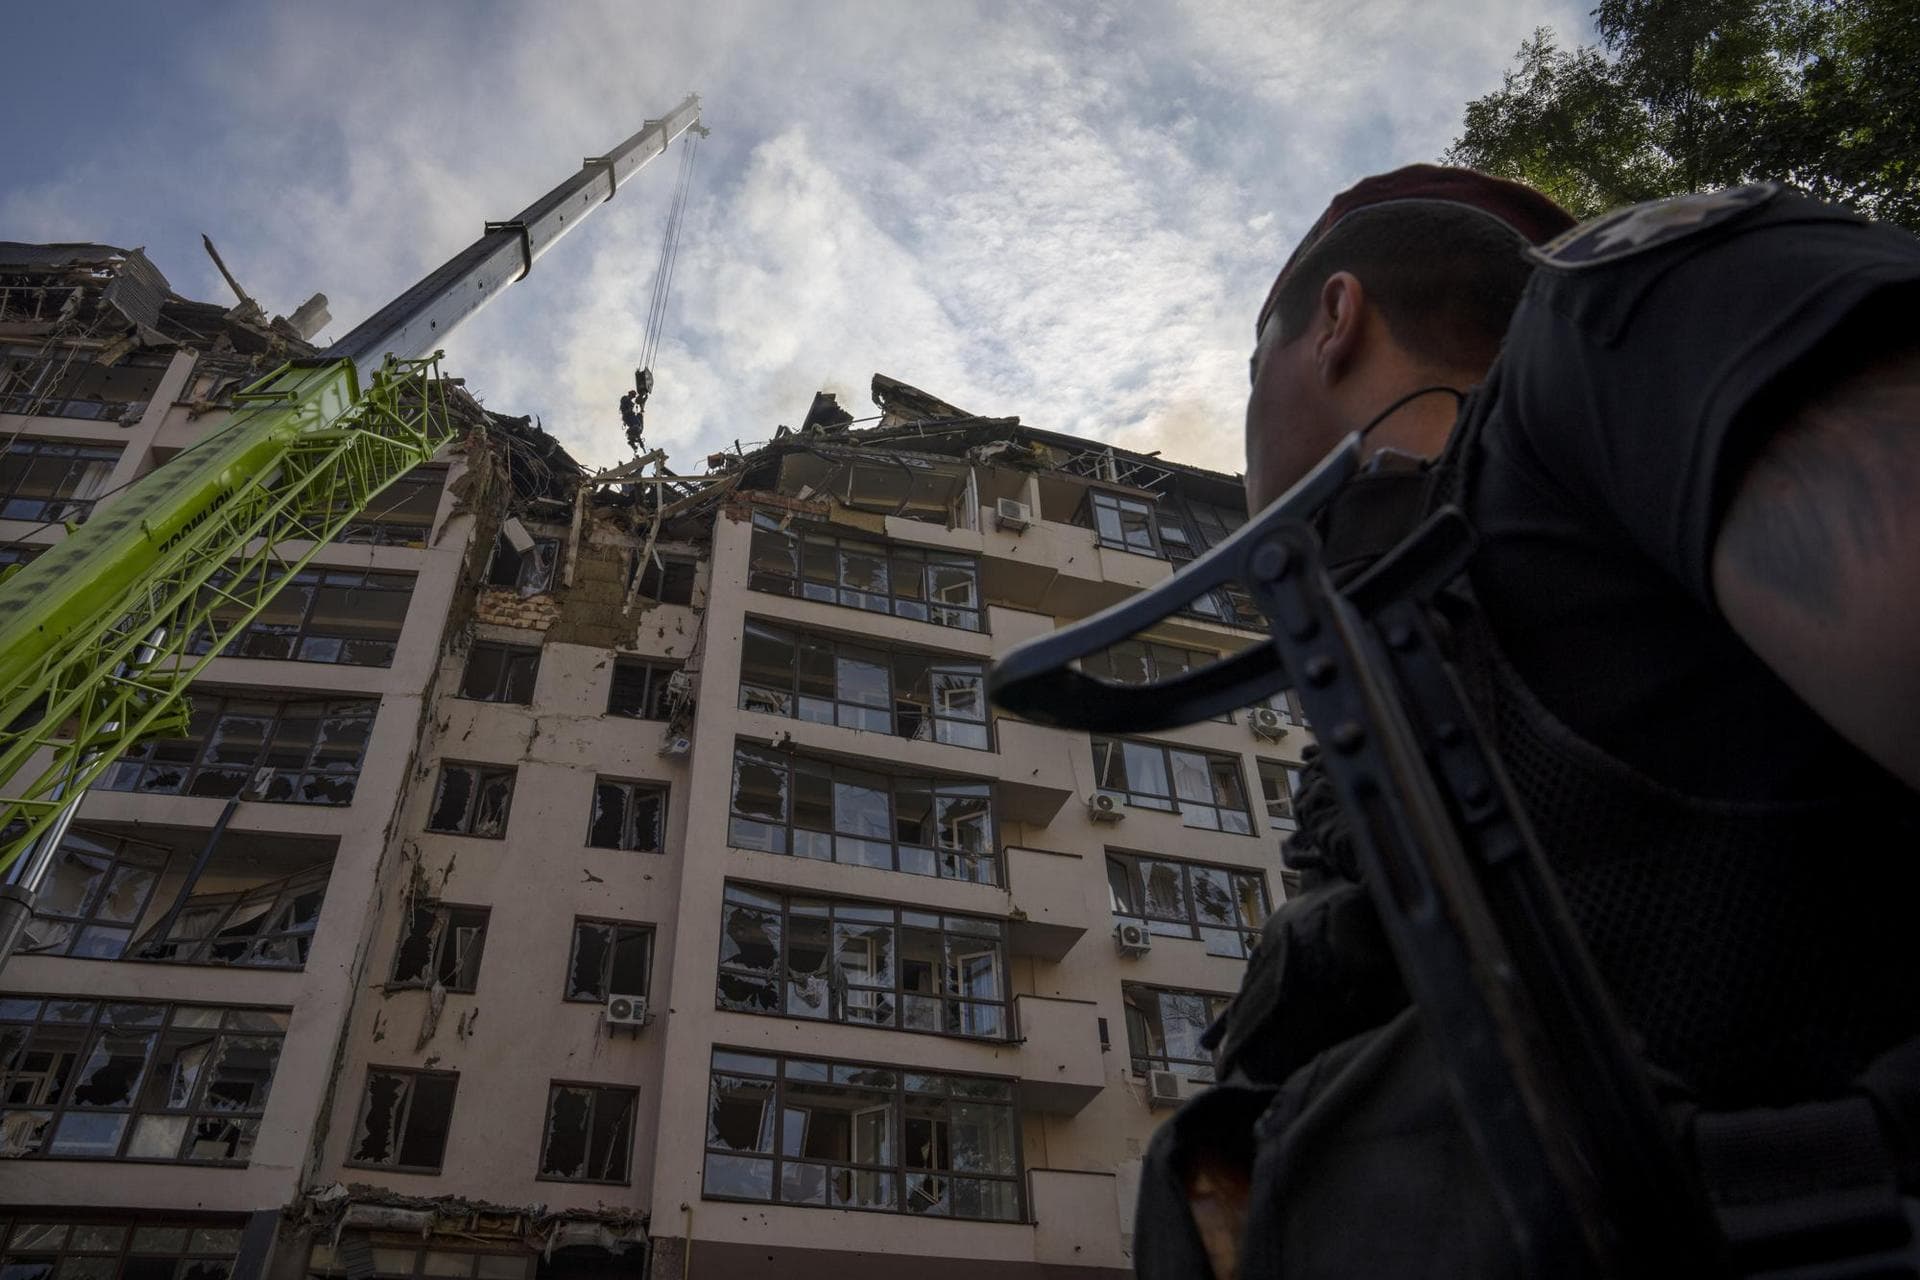 Servicemen work at the scene at a residential building following explosions, in Kyiv